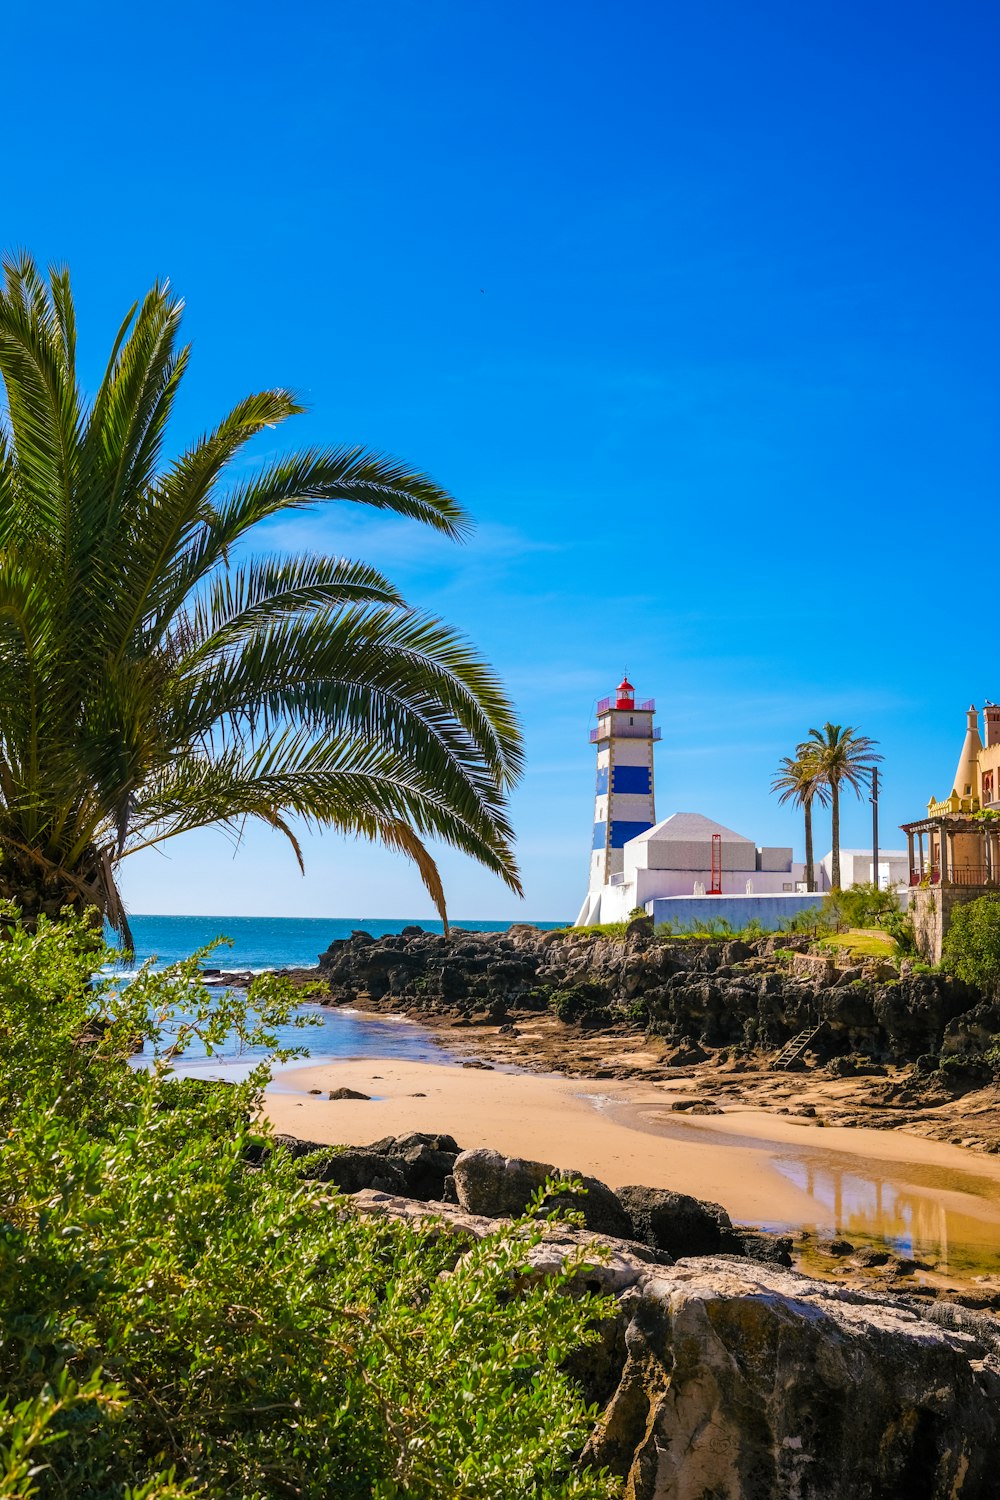 a beach with a light house and palm trees